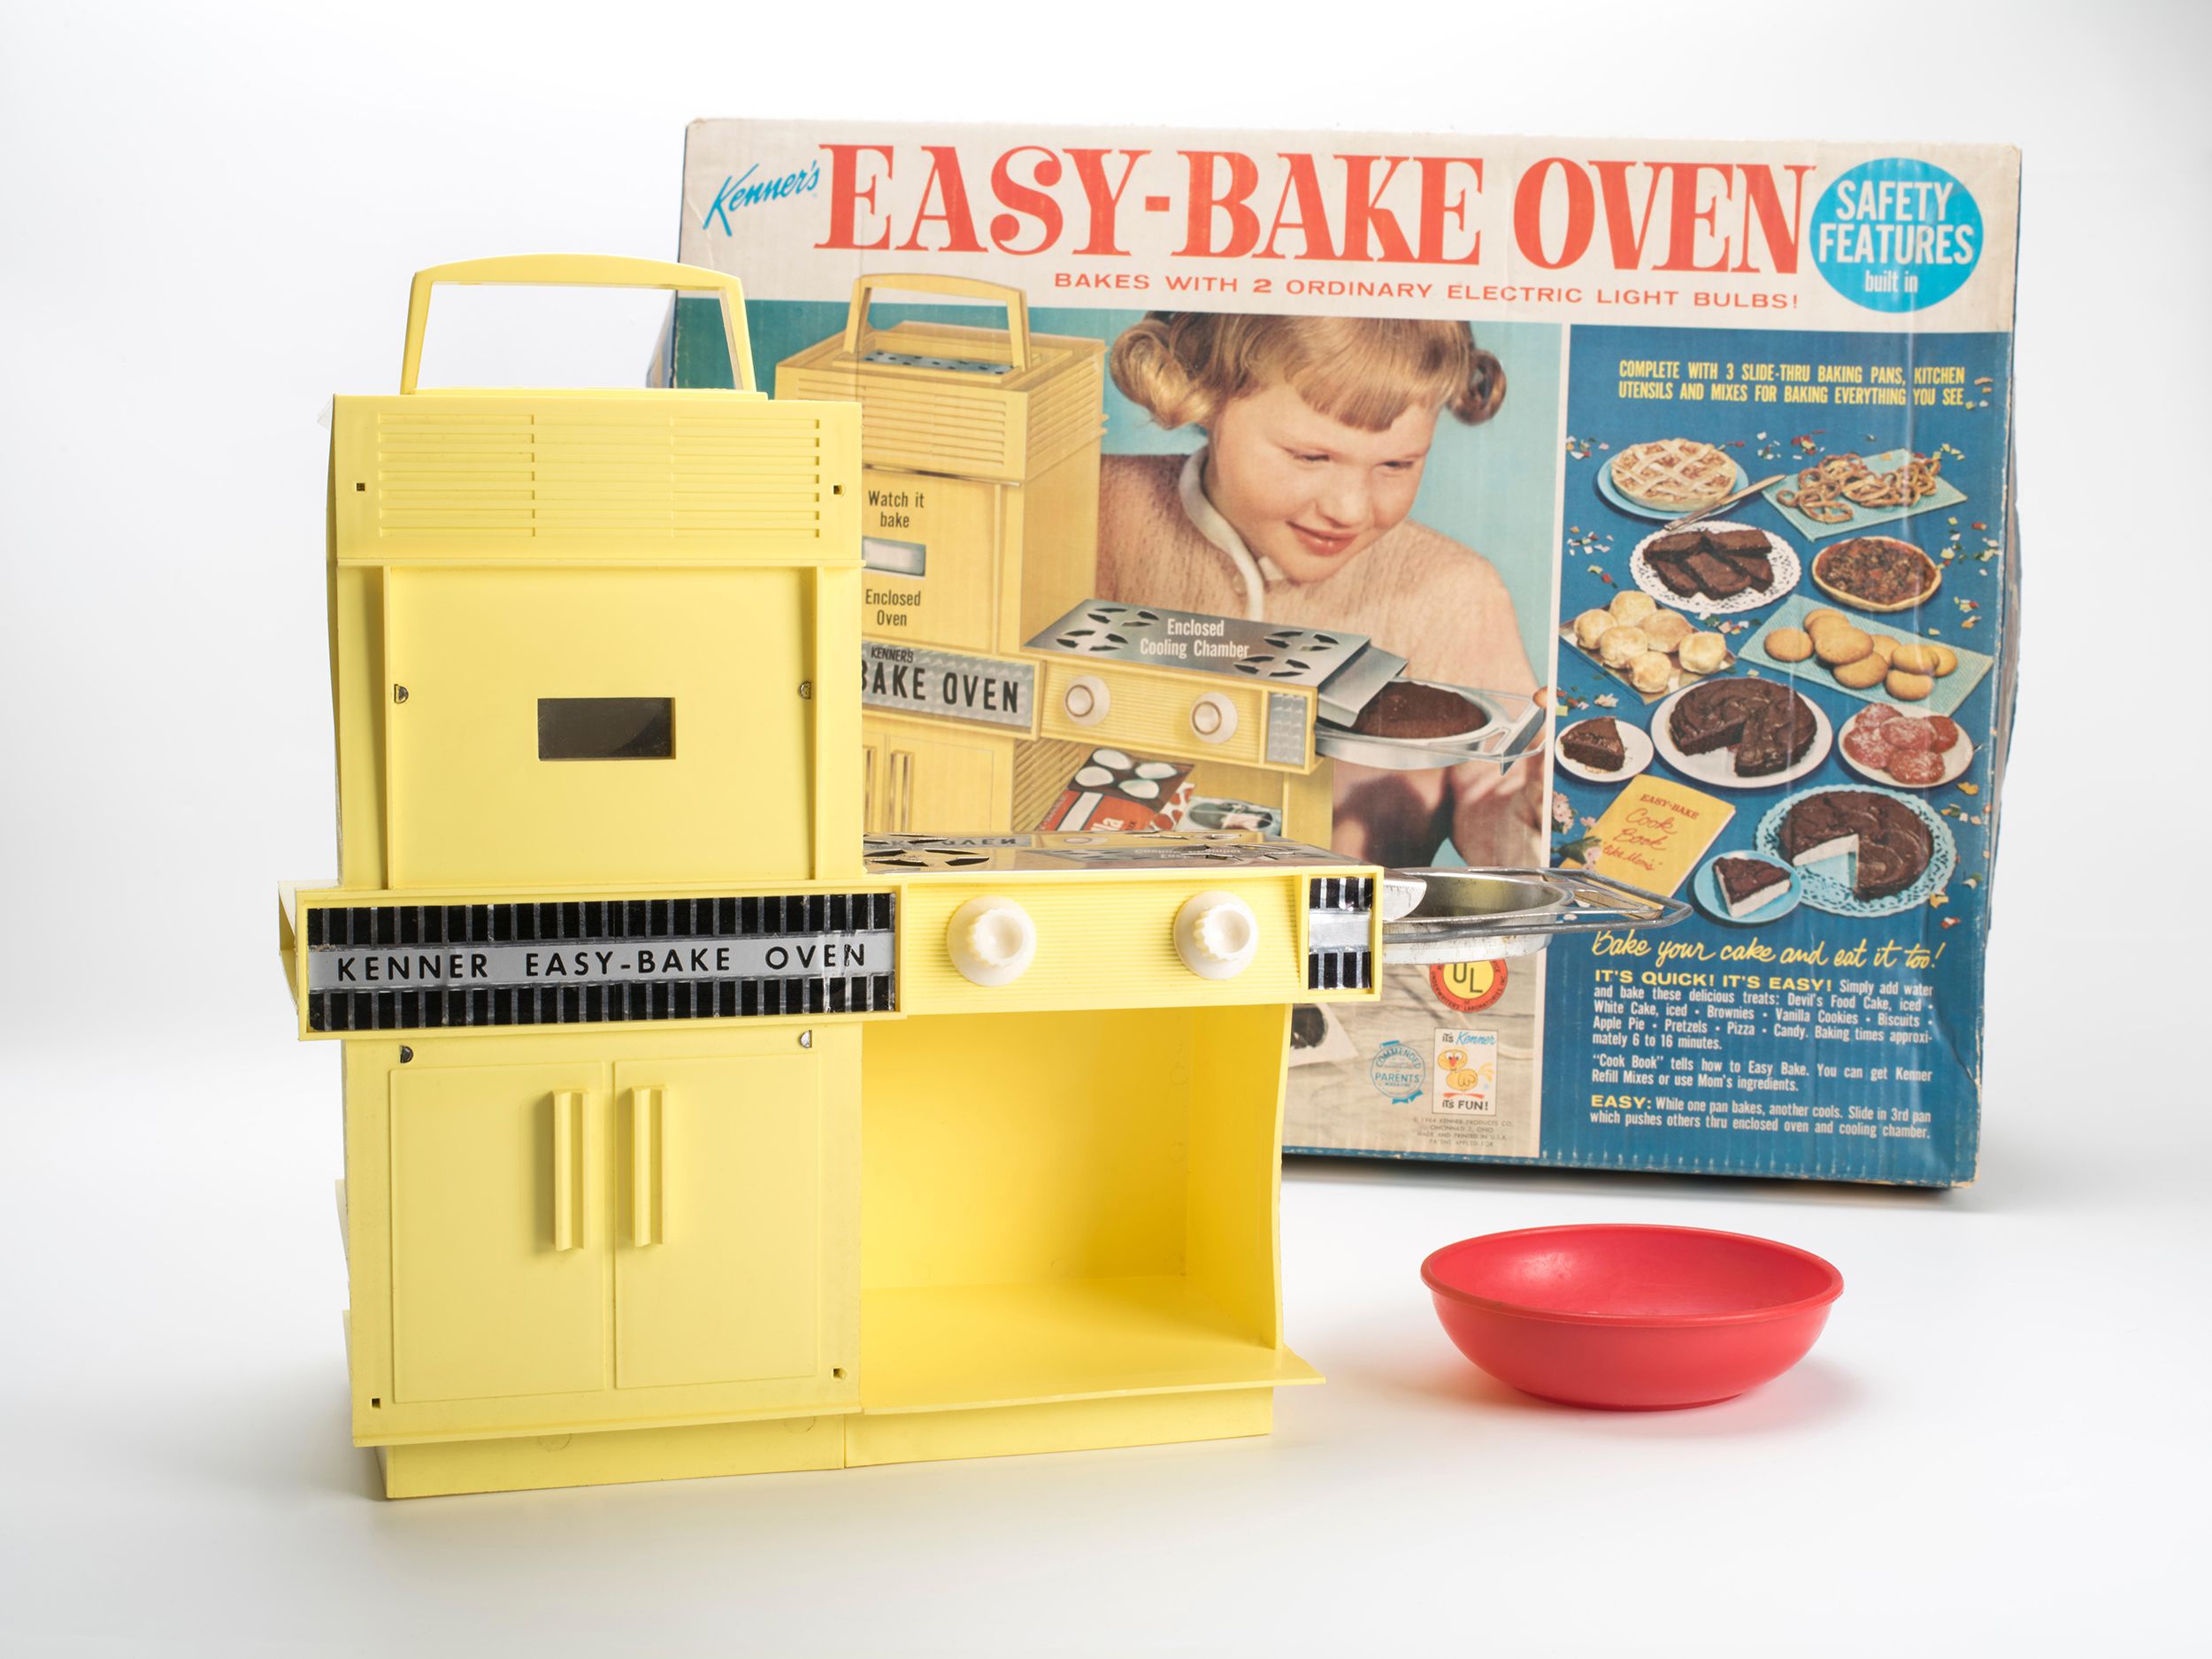 These are the most popular toys from the past 50 years, based on study